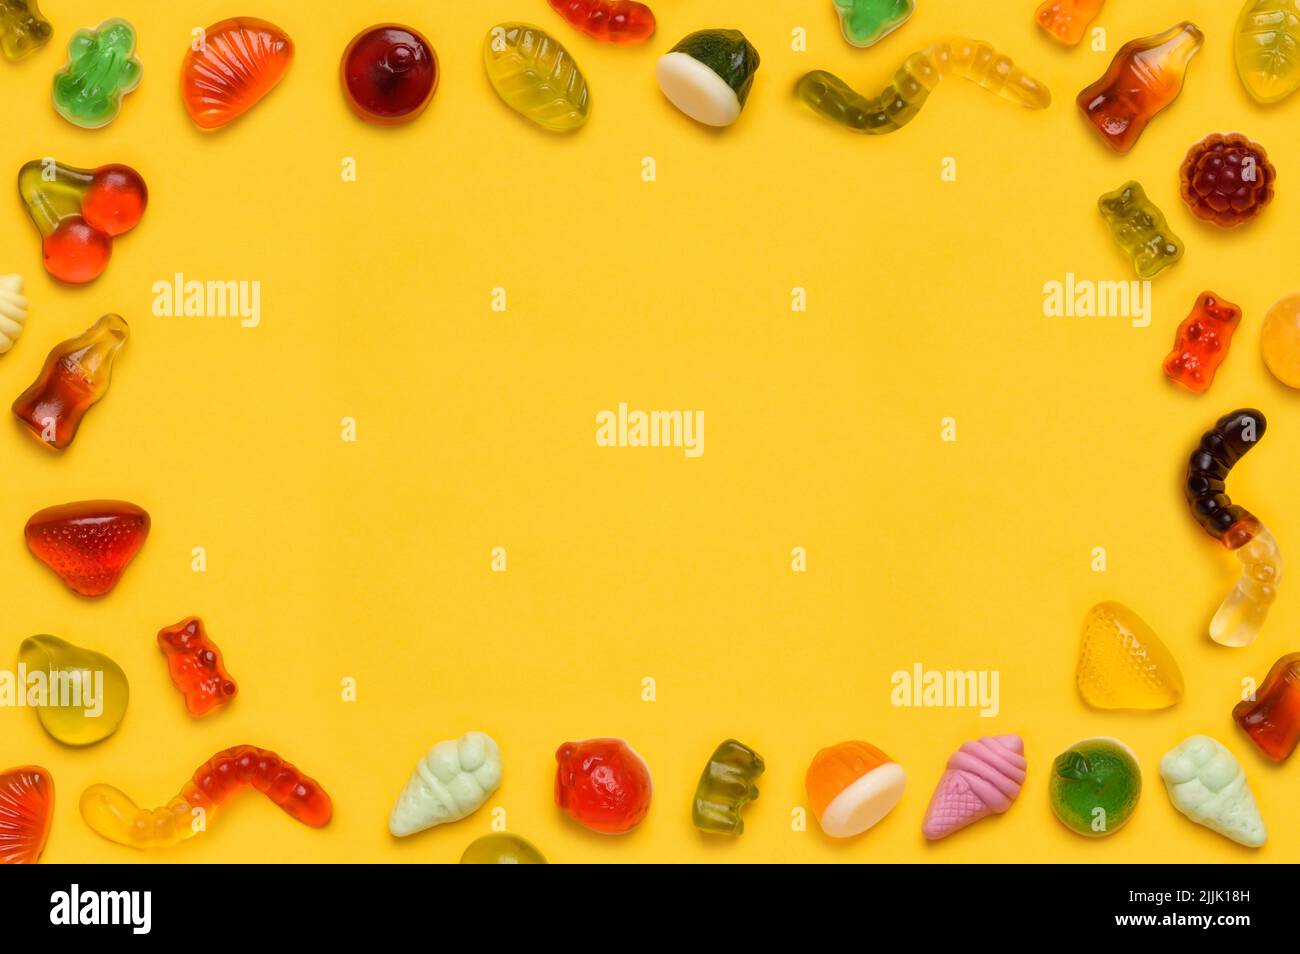 Gummy candy frame border, assorted jelly gum fruit candy sweets on yellow background top view flat lay Stock Photo